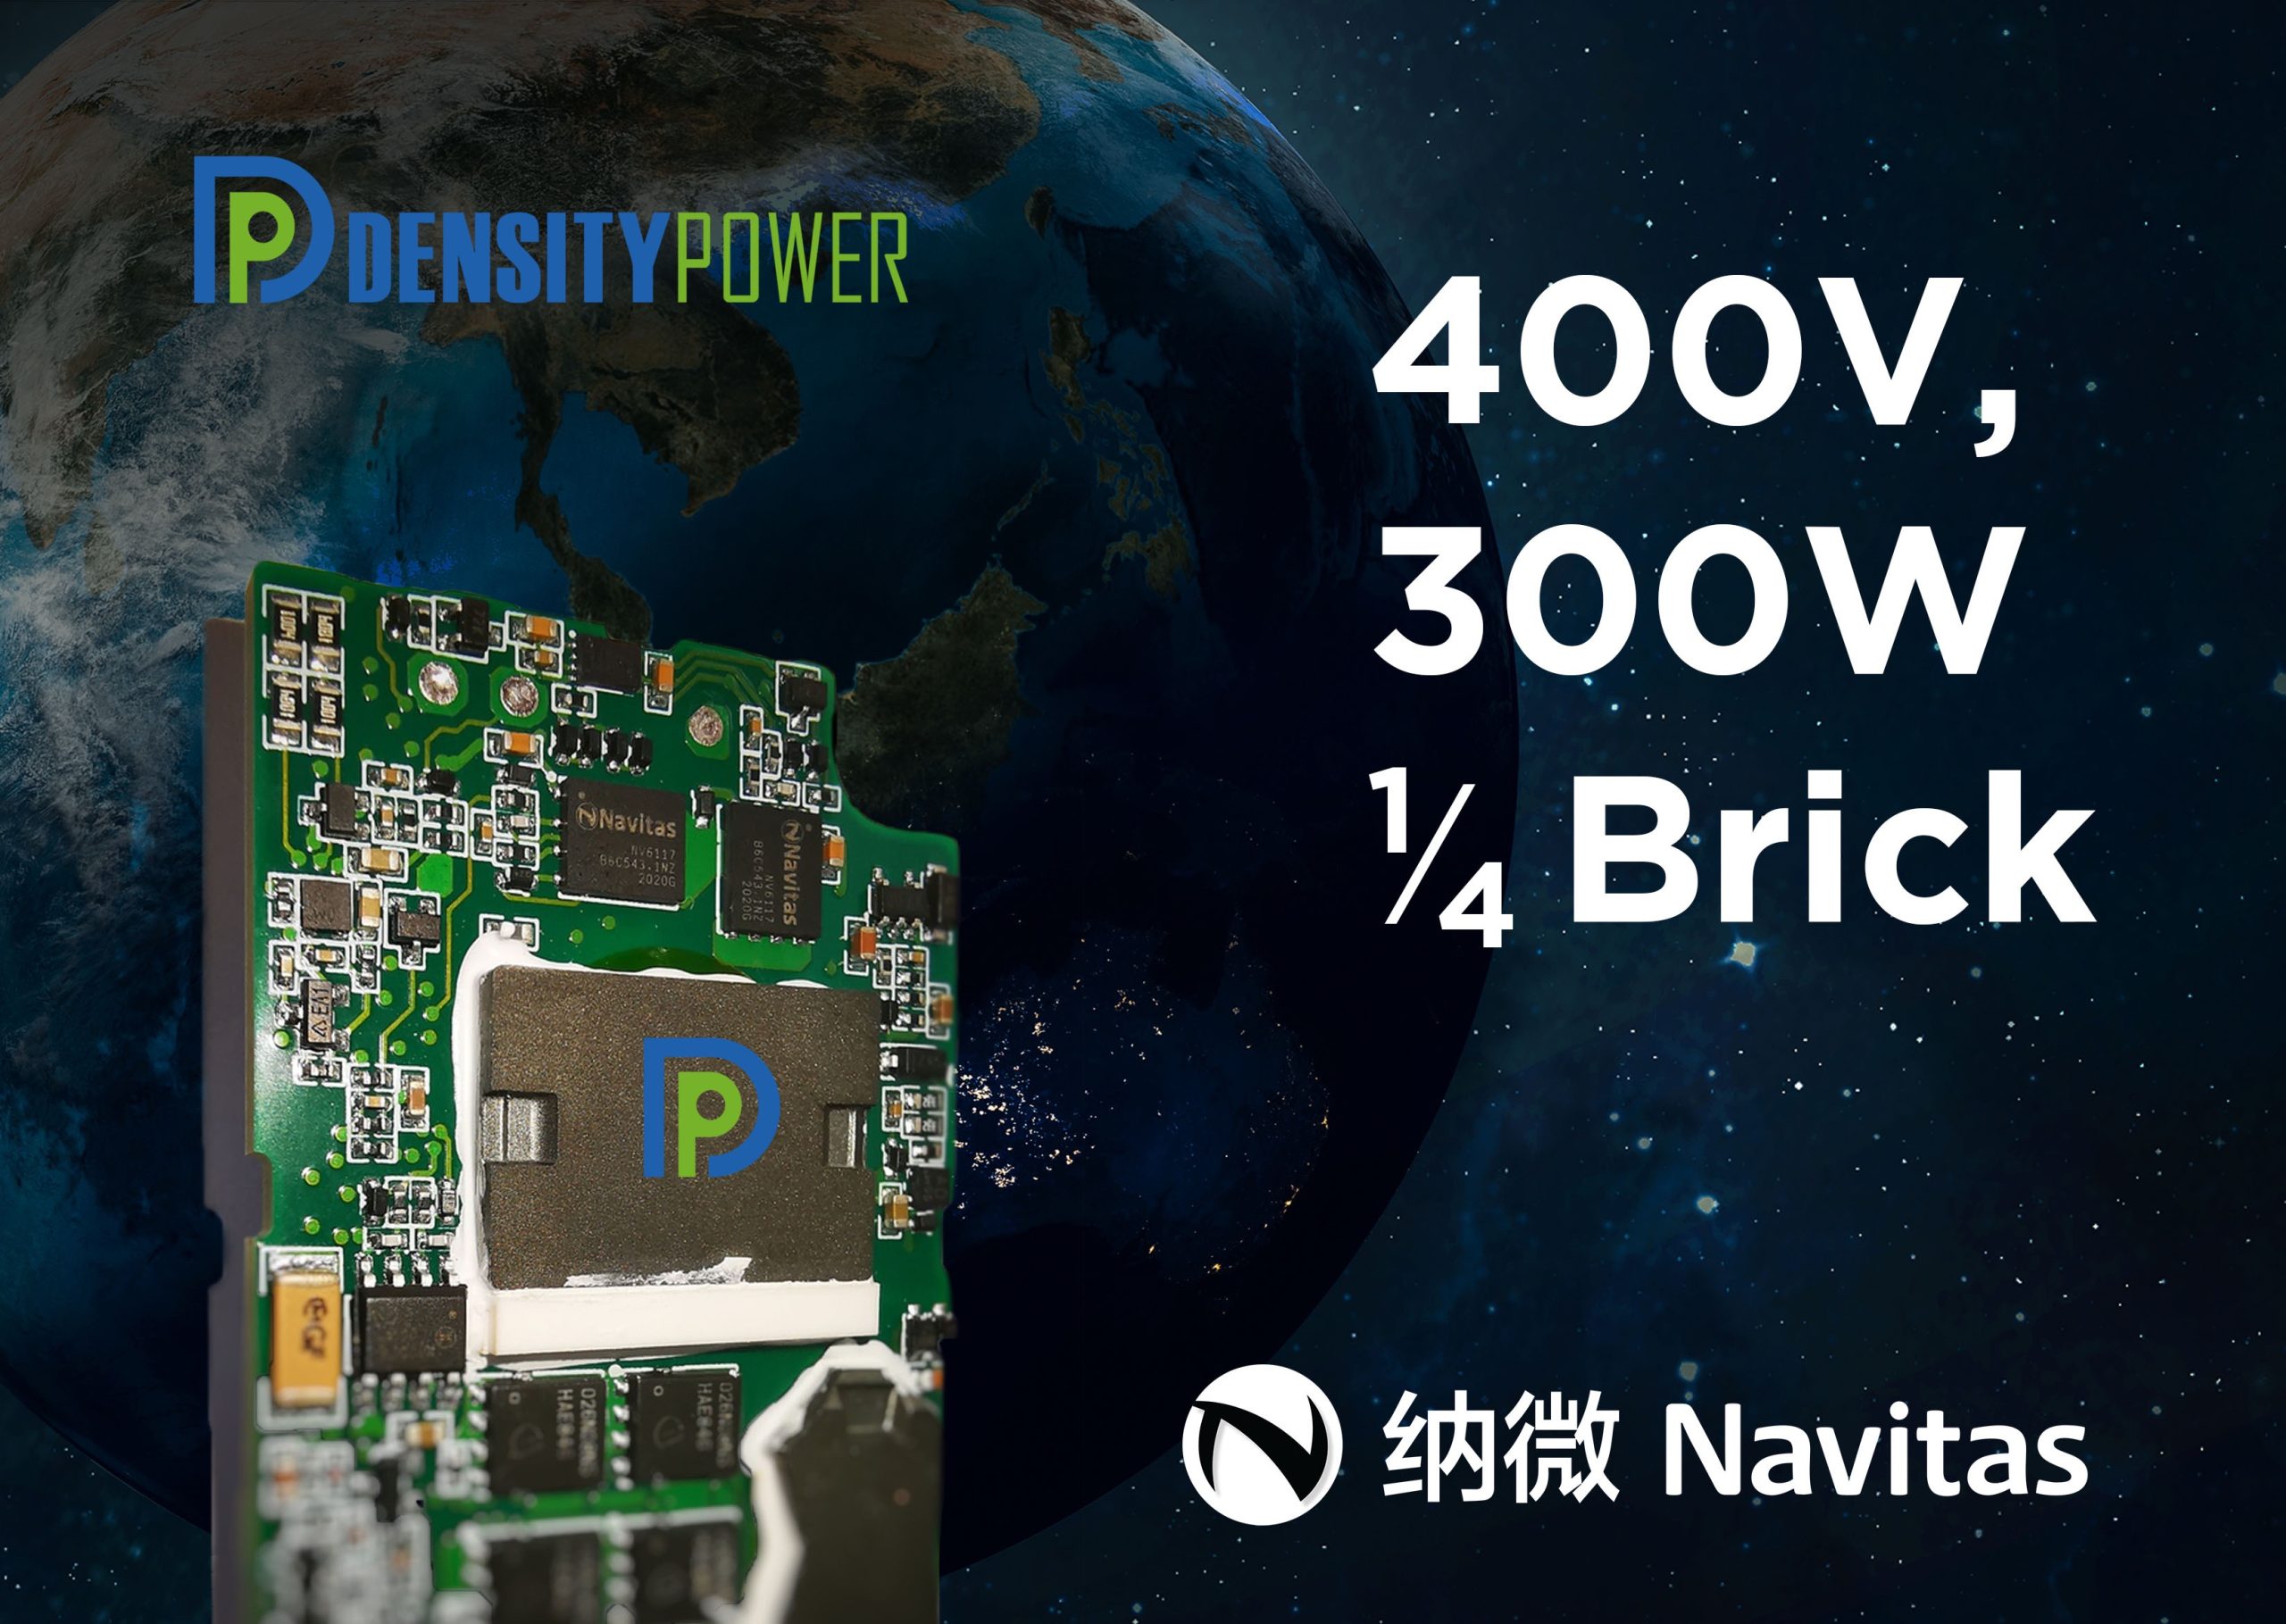 Navitas Delivers 2x More Power for Industrial, Telecom and Data Center Power Supplies.